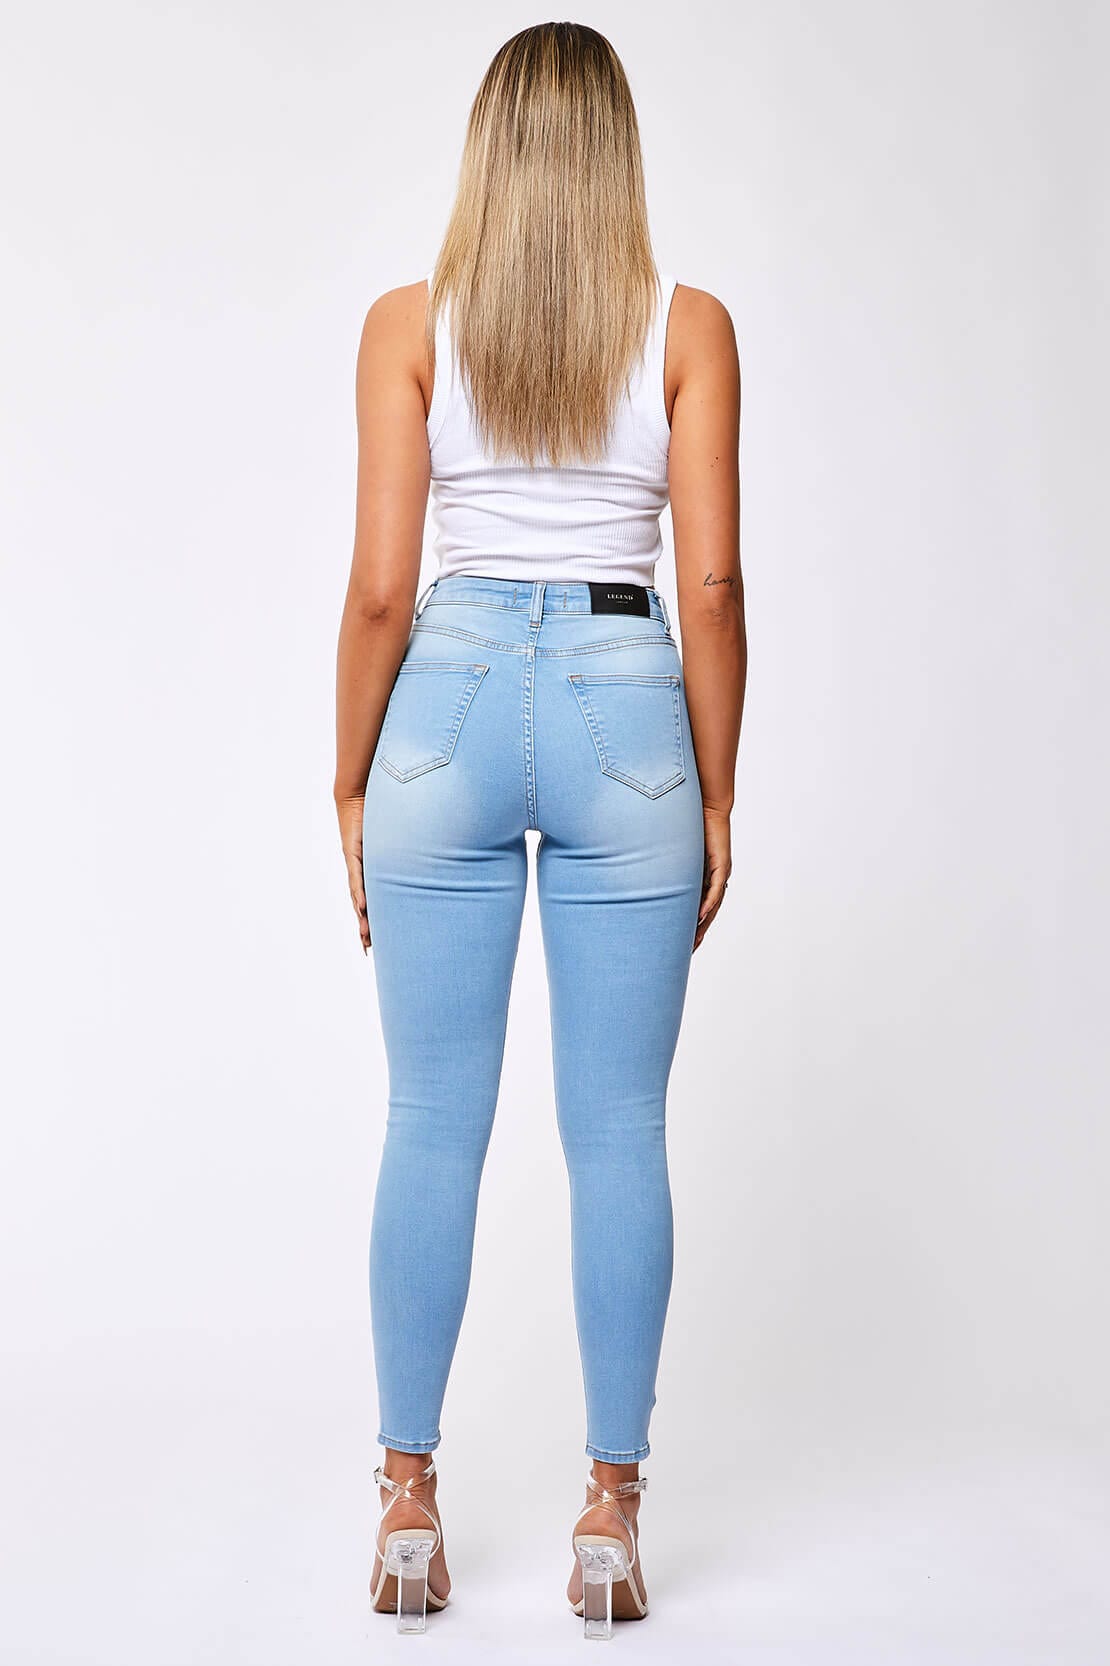 Legend London Womens Jeans SKINNY JEANS - WASHED PALE BLUE